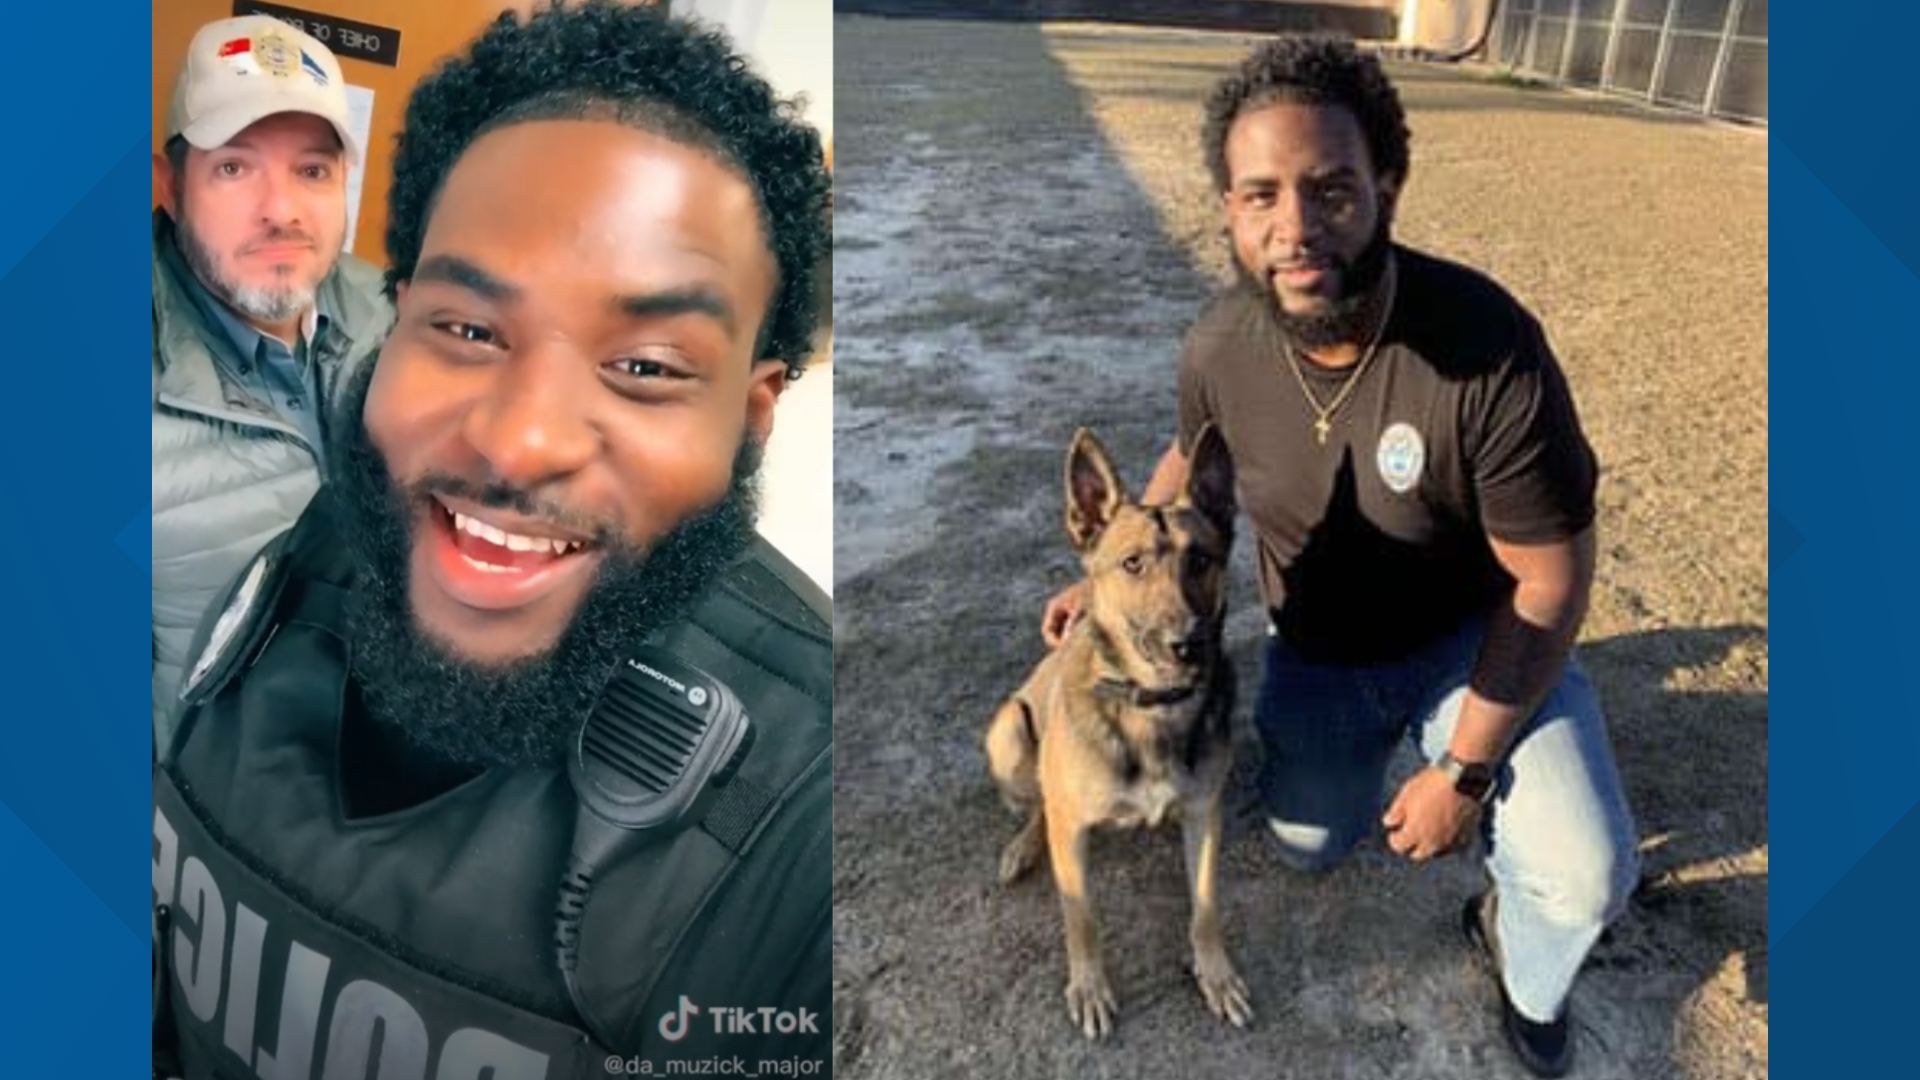 The Biscoe Police Department is getting a new K9 officer thanks to thousands of dollars, fundraised from TikTok users.